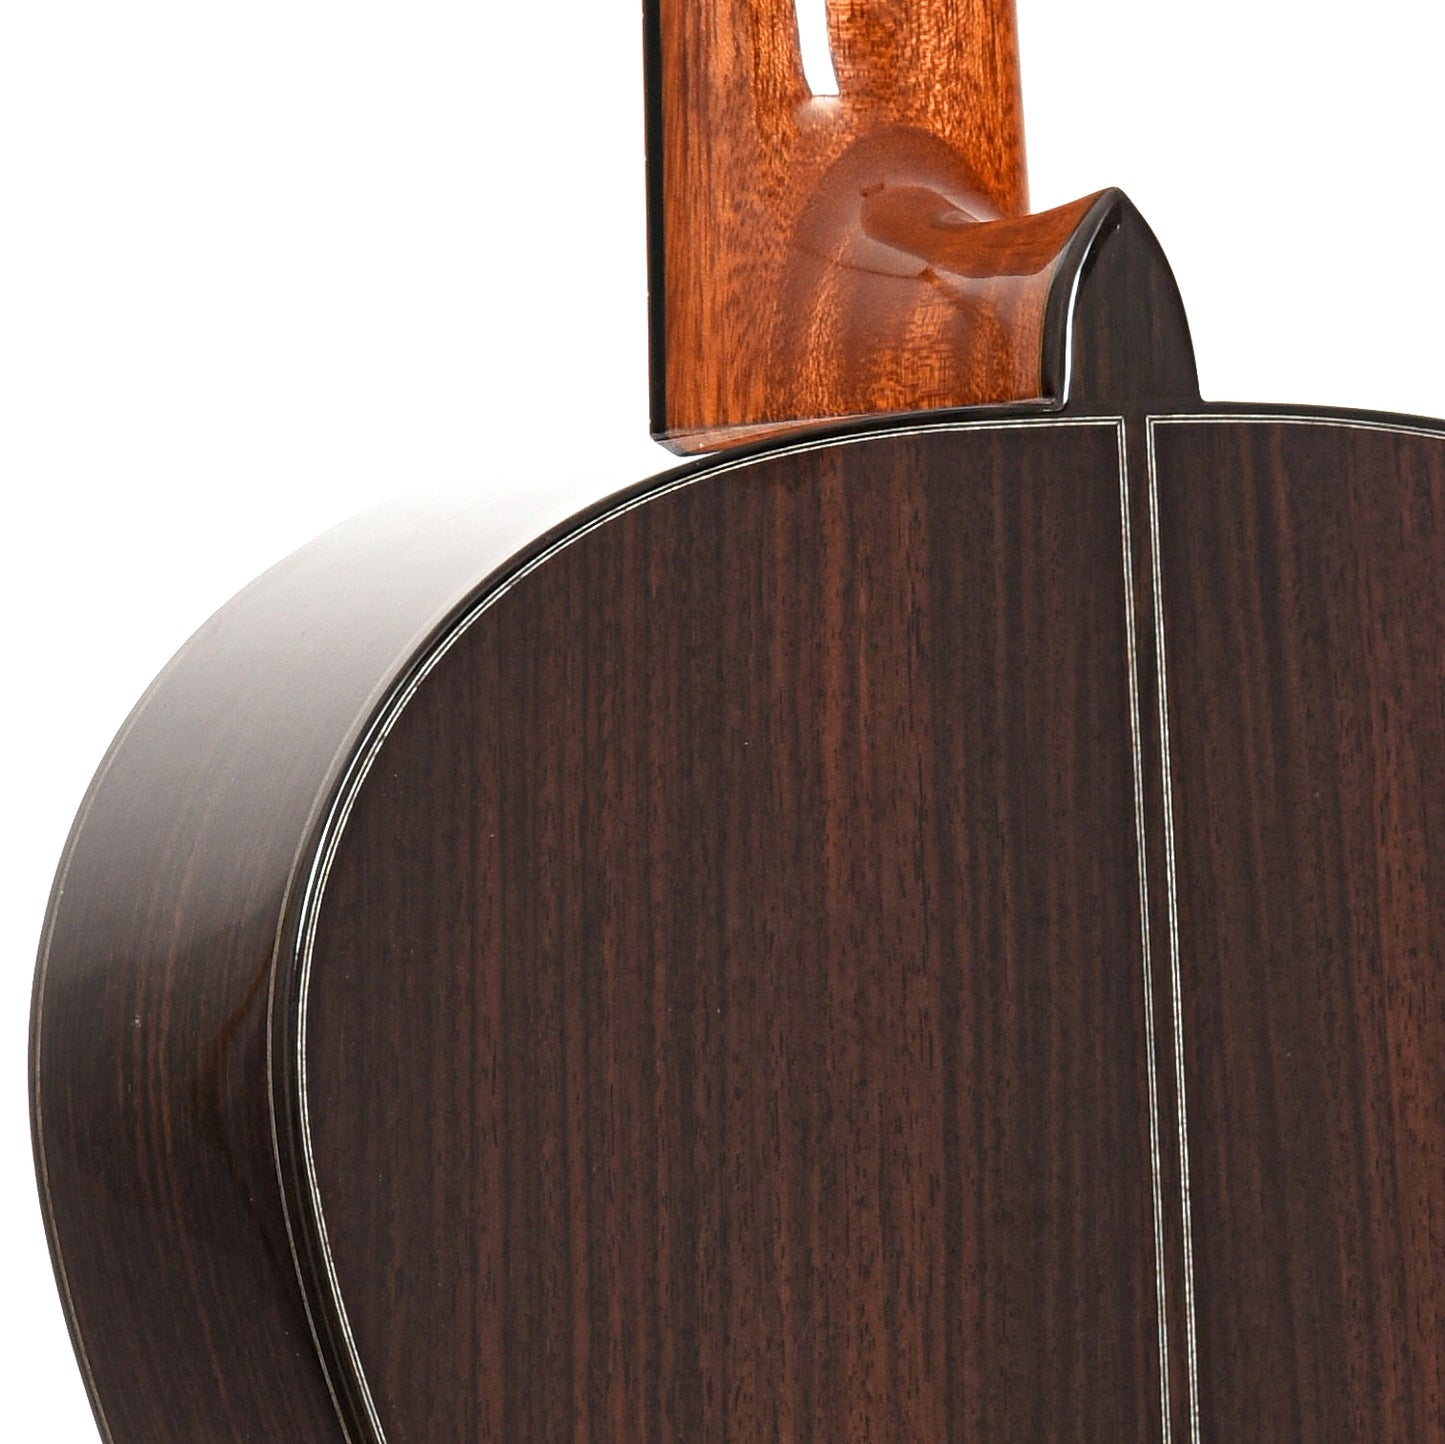 Neck Joint of Cordoba "Friederich" Classical Guitar 